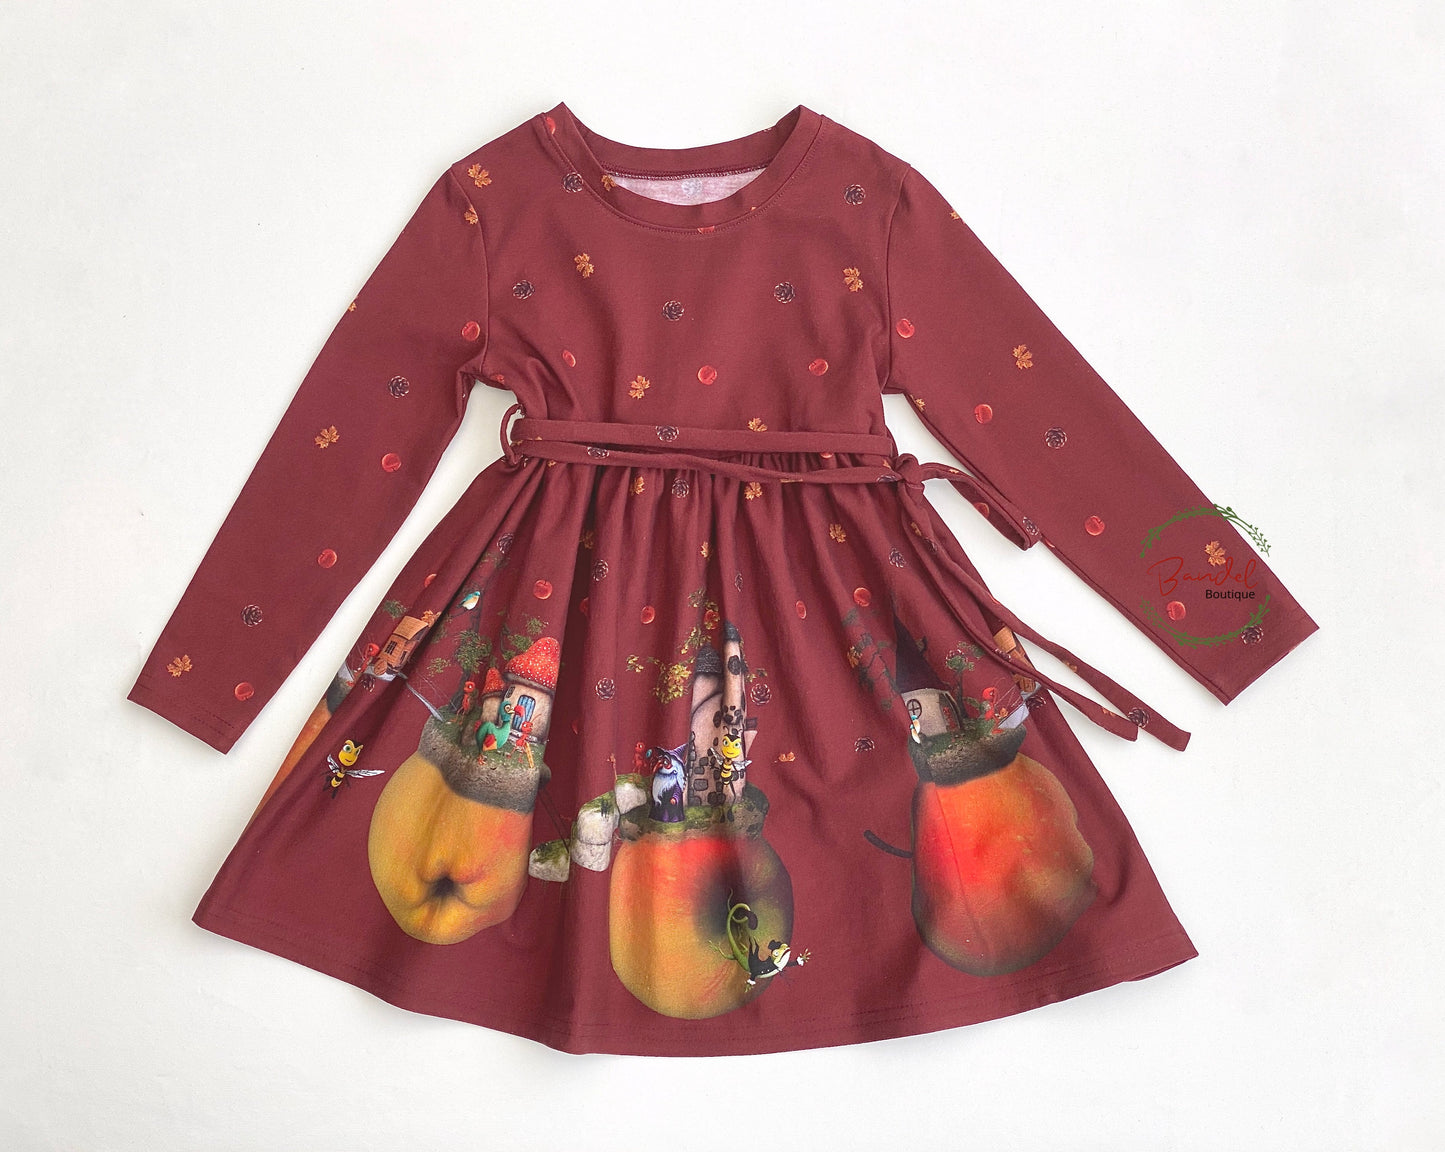 digital print girl dress is perfect for the cool autumn and winter days! It's made of jersey cotton, with long sleeves to keep your little girl warm and comfy. The beautiful border print skirt adds a fun, charming touch to the dress.